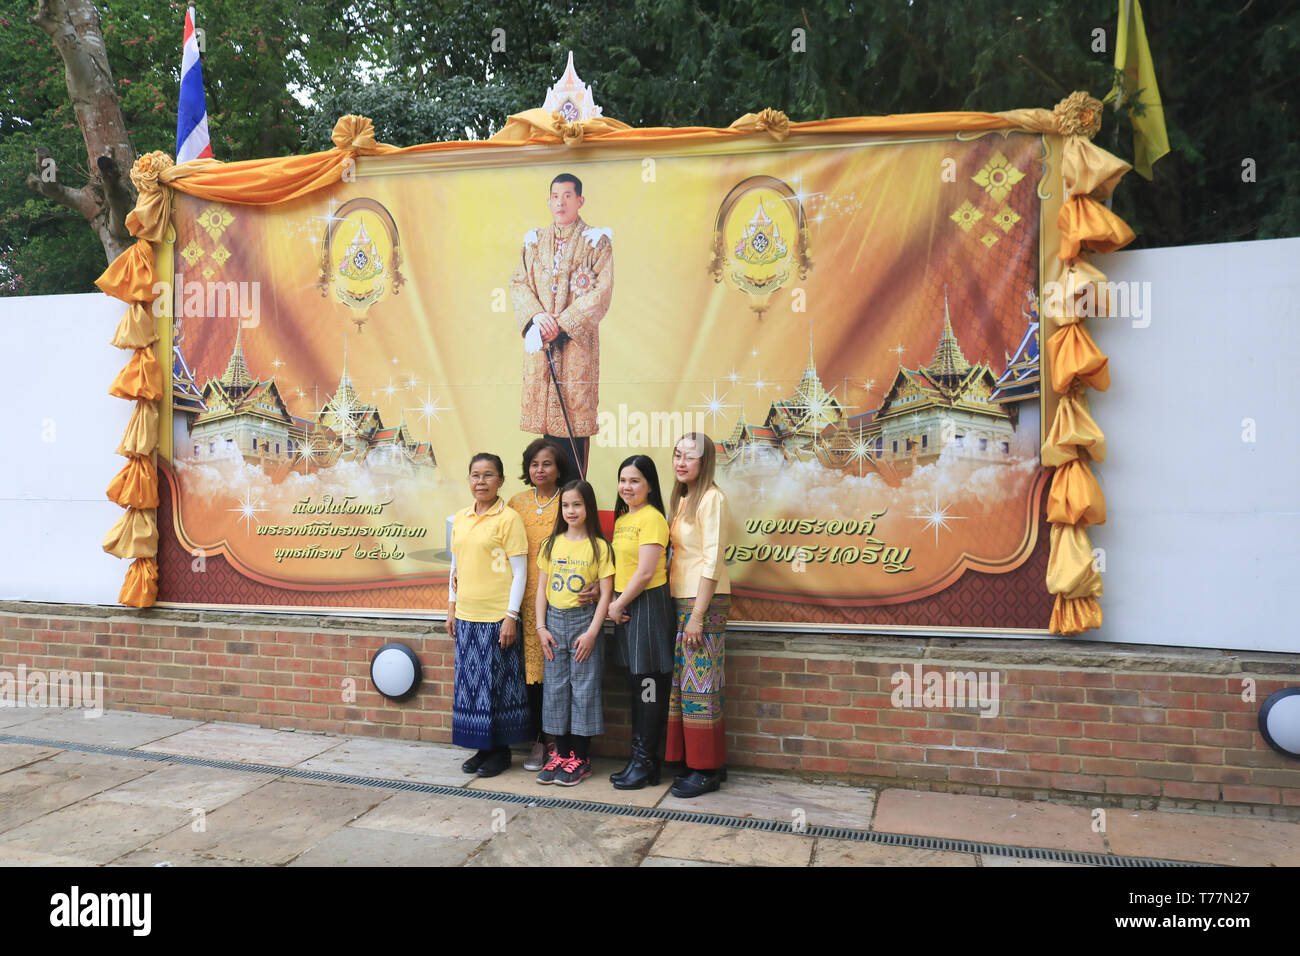 London UK. 5th May 2019. Members of the Thai community wearing the yellow  Royal colours of the Thai monarchy pose in front of a giant poster of the newly crowned monarch  King Rama X of Thailand, Maha Vajiralongkorn  at the Wat Buddhapadipa Buddhist temple in Wimbledon to celebrate his coronation Credit: amer ghazzal/Alamy Live New Stock Photo